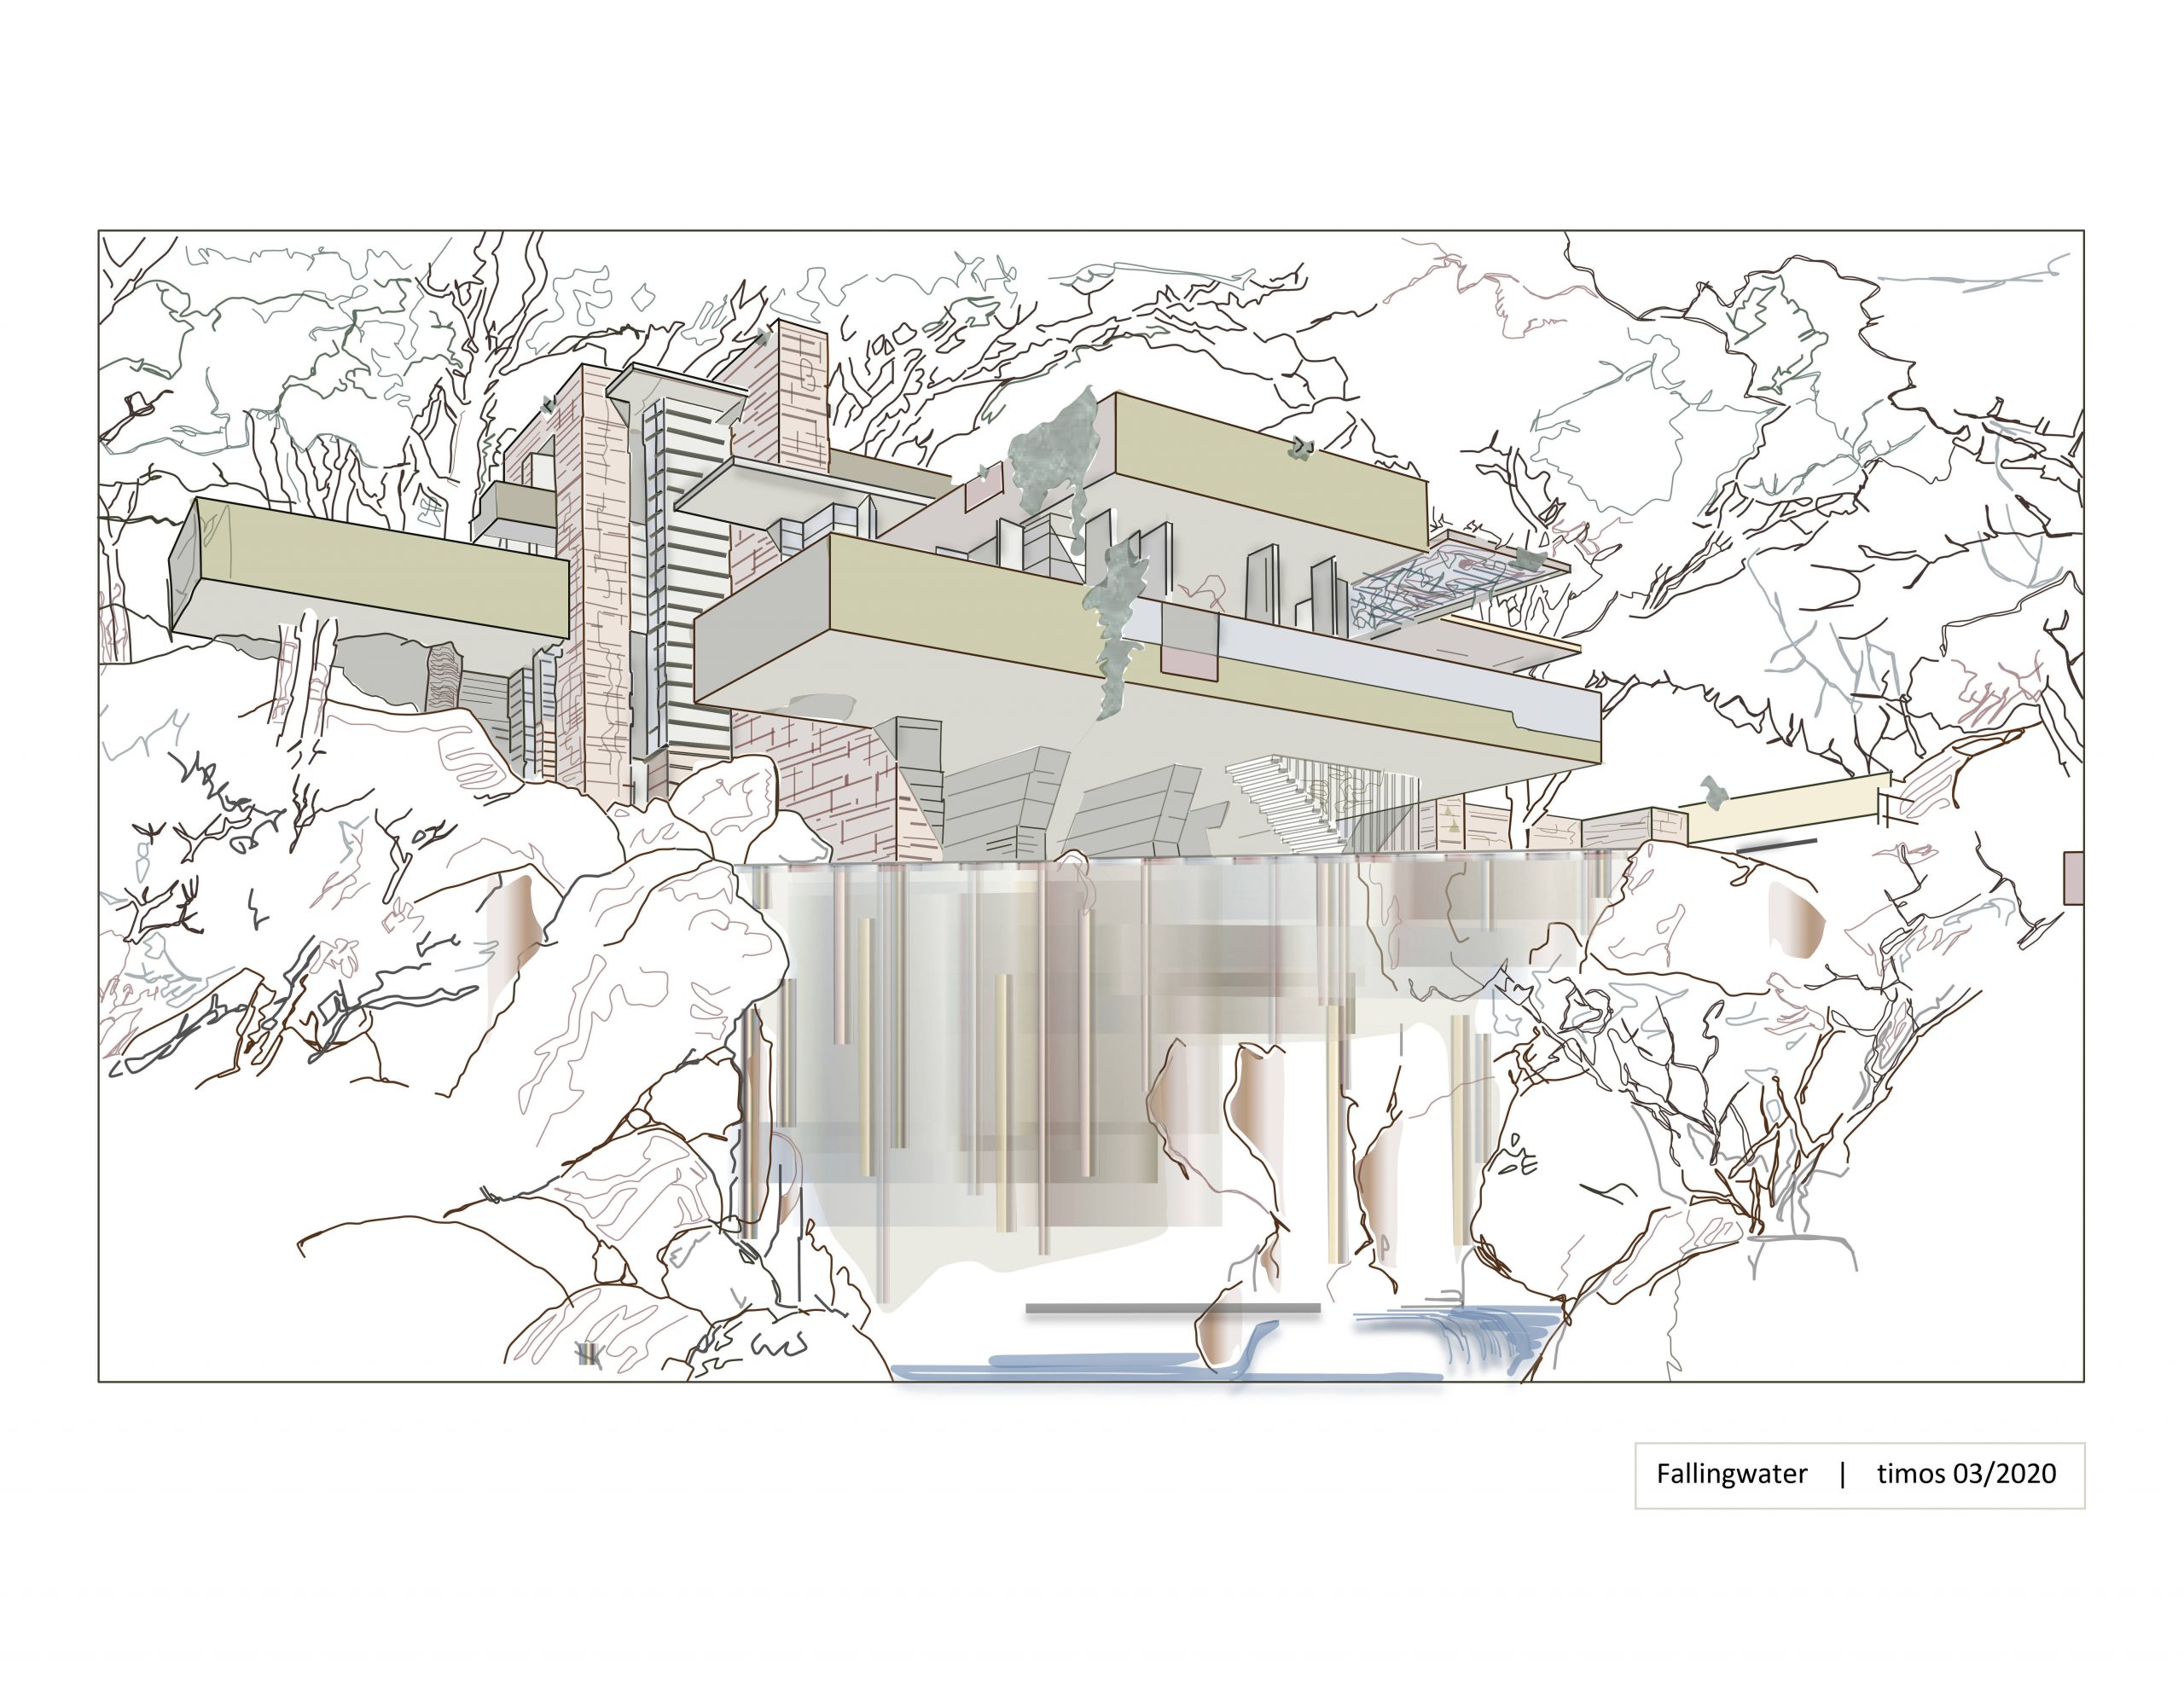 Fallingwater by FLW | phase 04